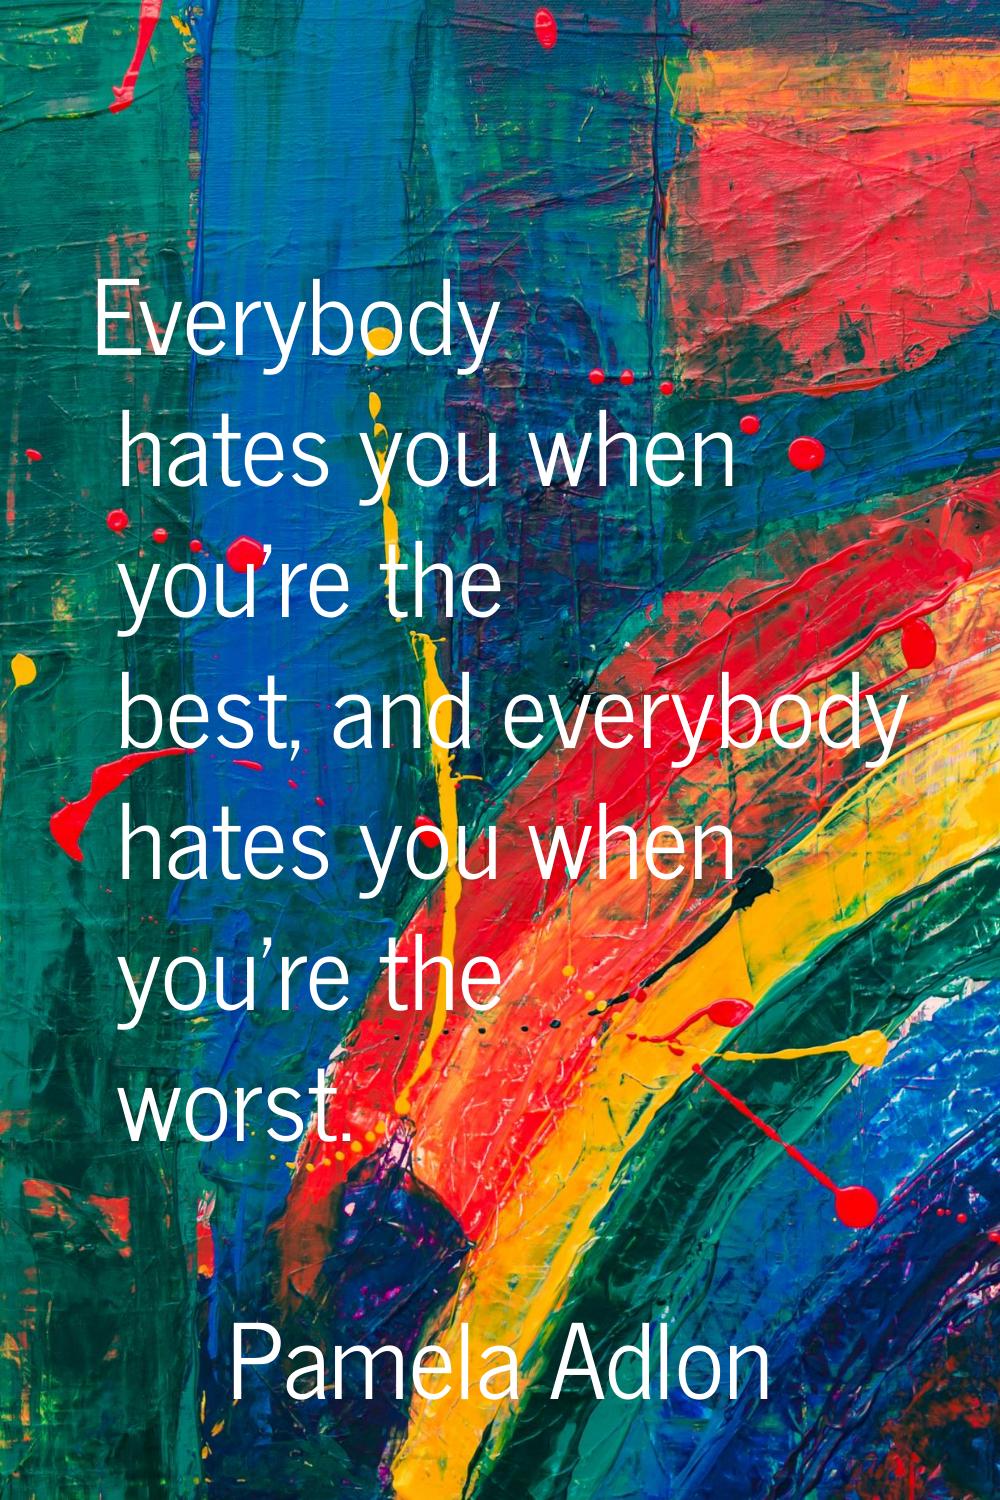 Everybody hates you when you're the best, and everybody hates you when you're the worst.